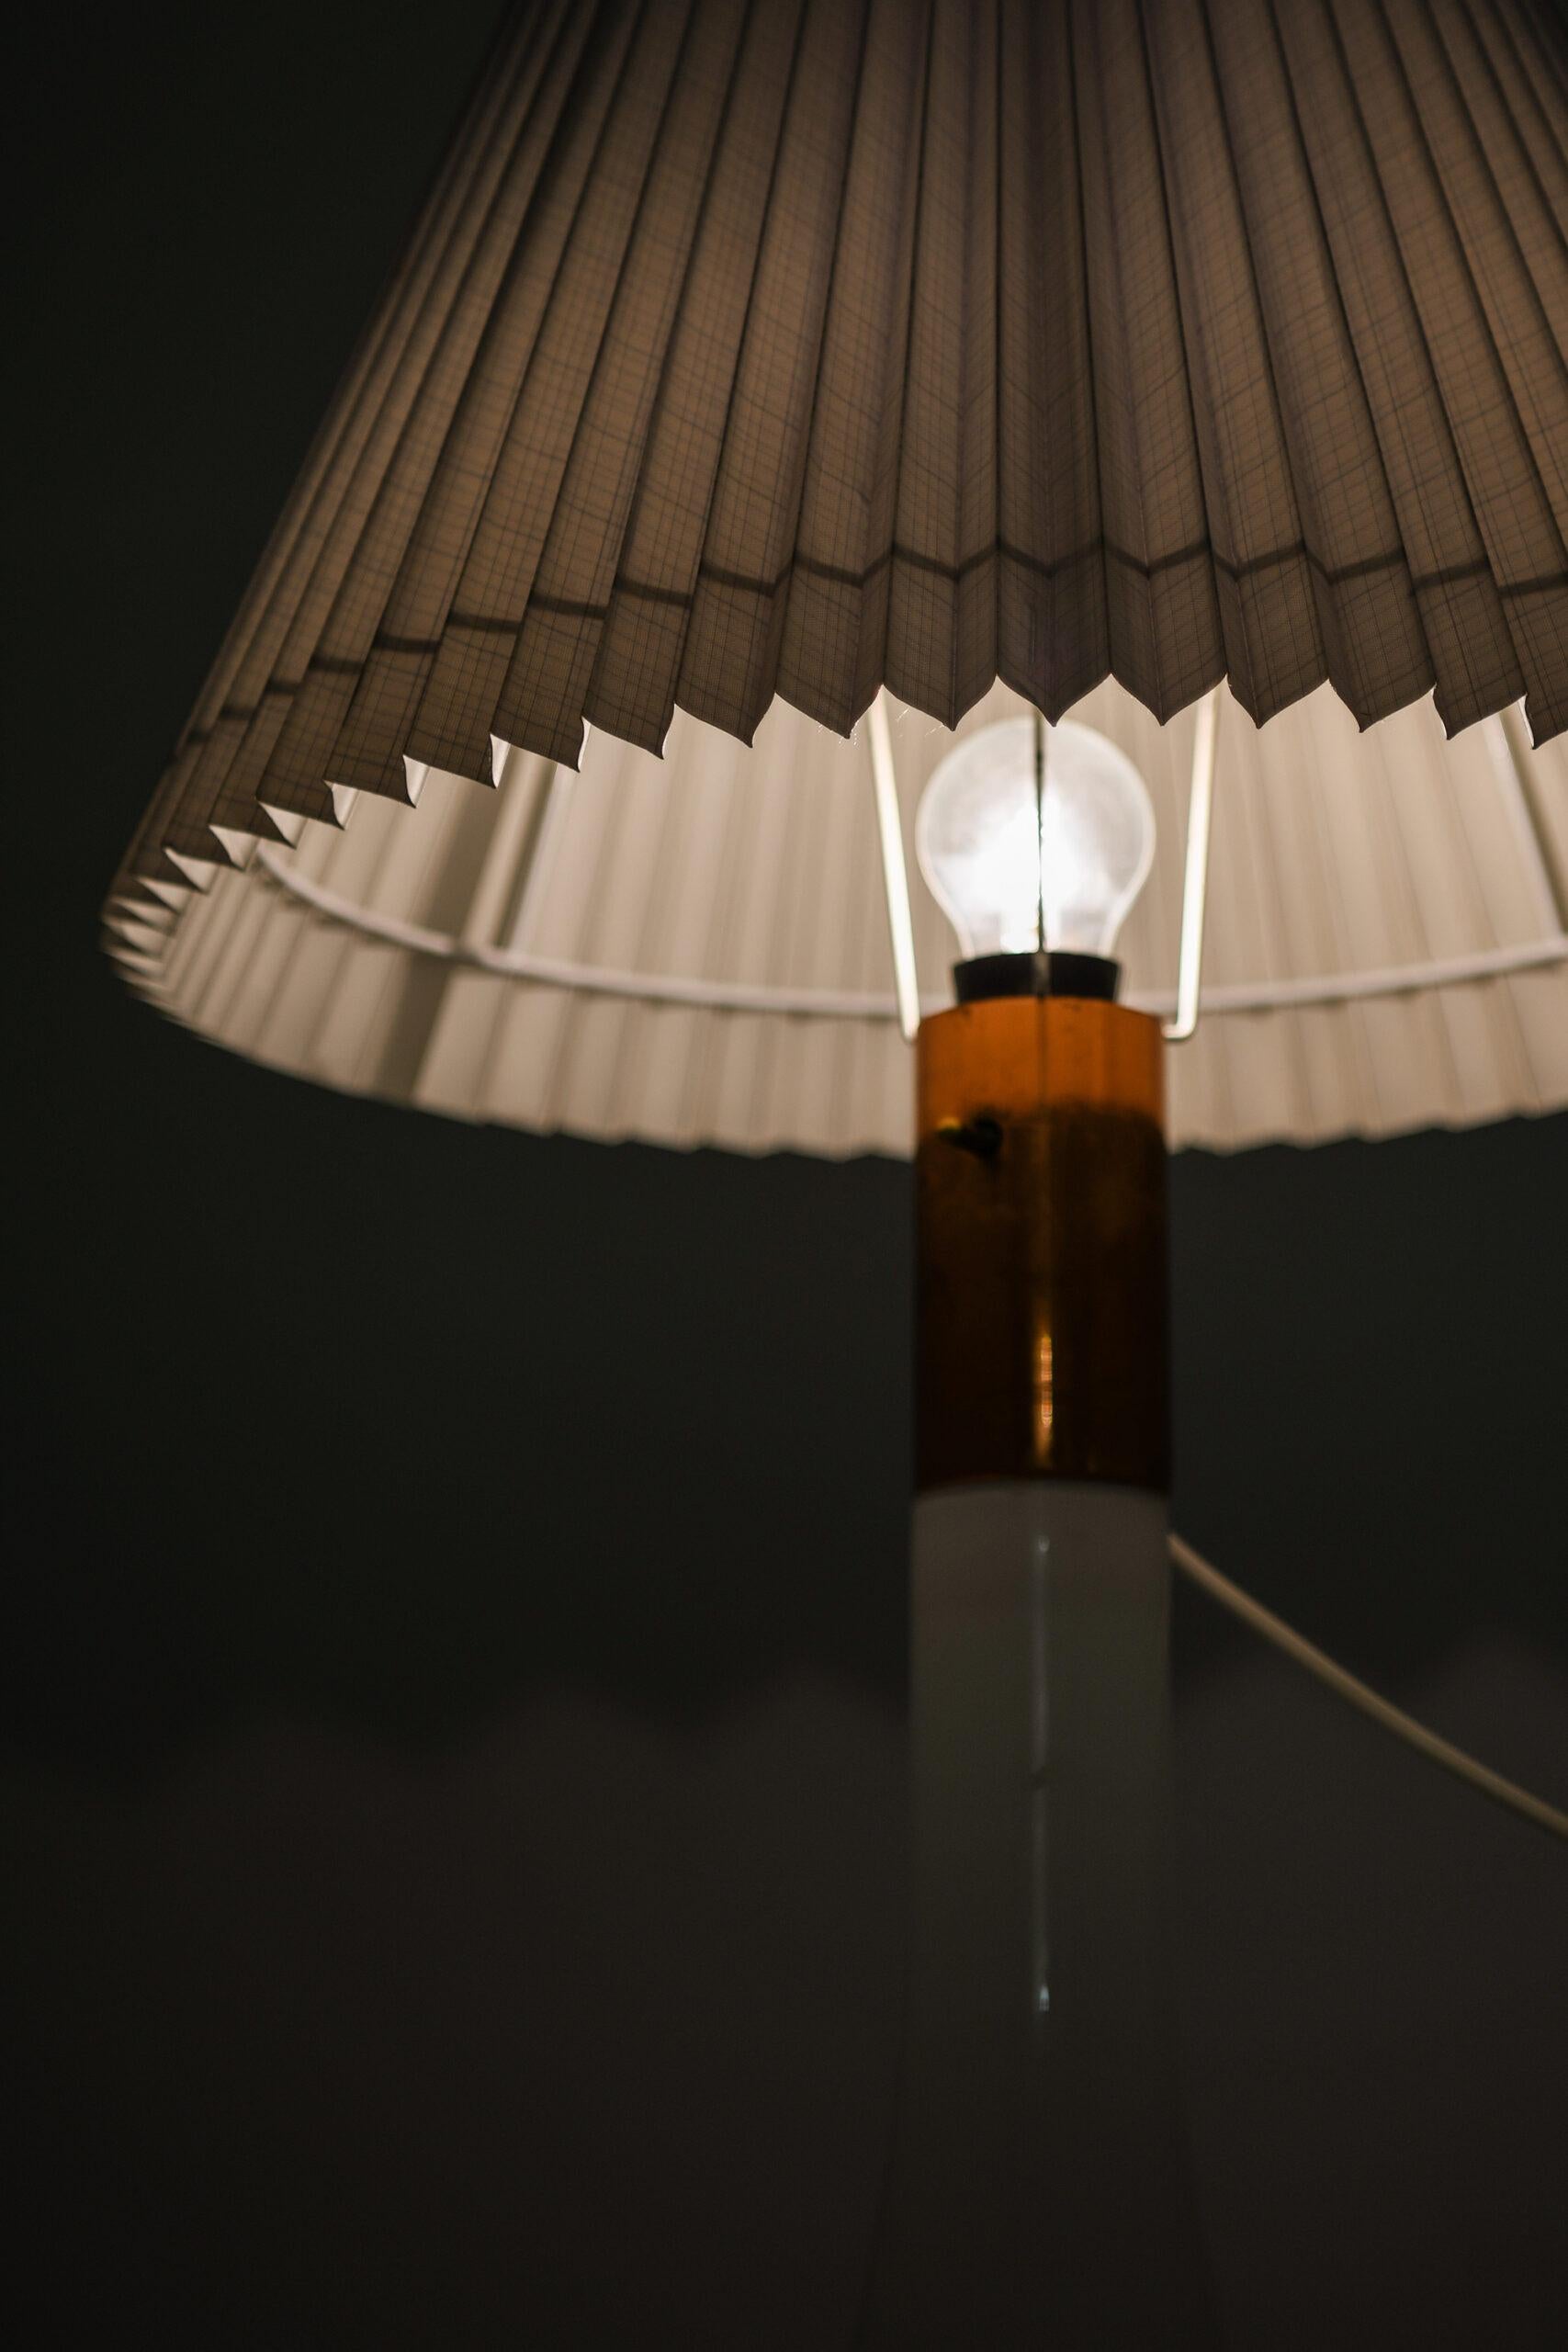 Mid-20th Century Lisa Johansson-Pape Table Lamp Model No. 06-017 Produced by Oy Stockmann-Ornö AB For Sale